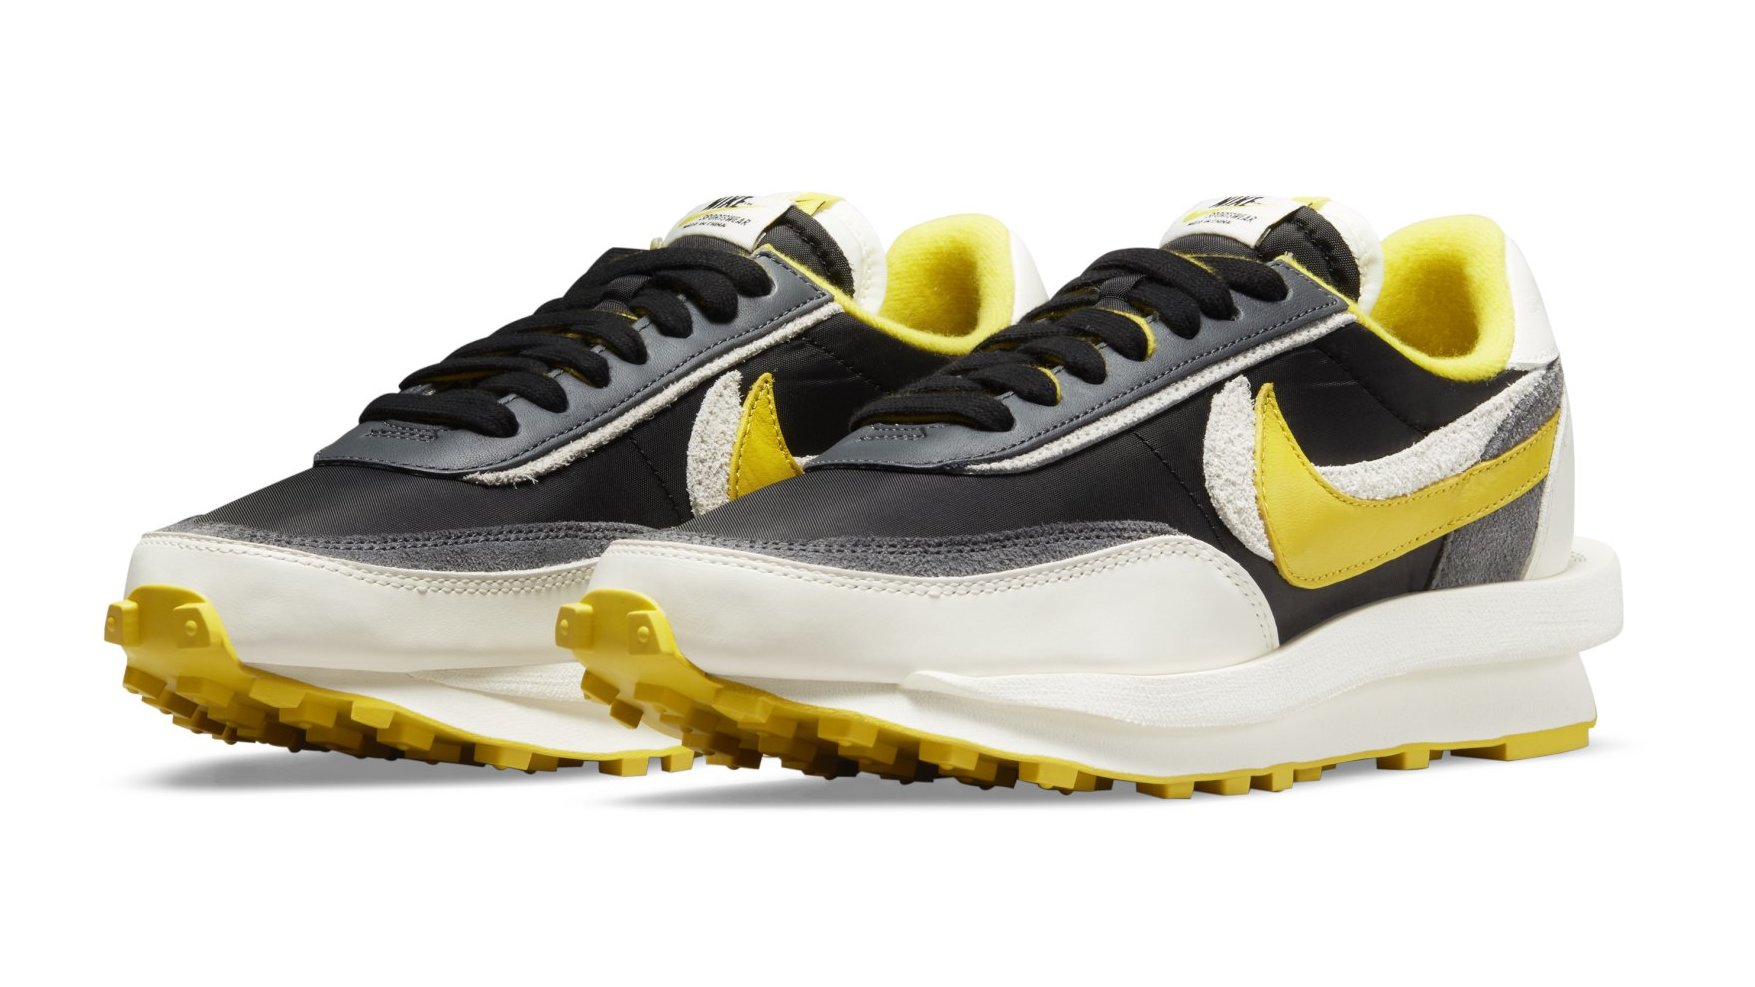 Undercover x Sacai x Nike LDWaffle Collabs Get an Official